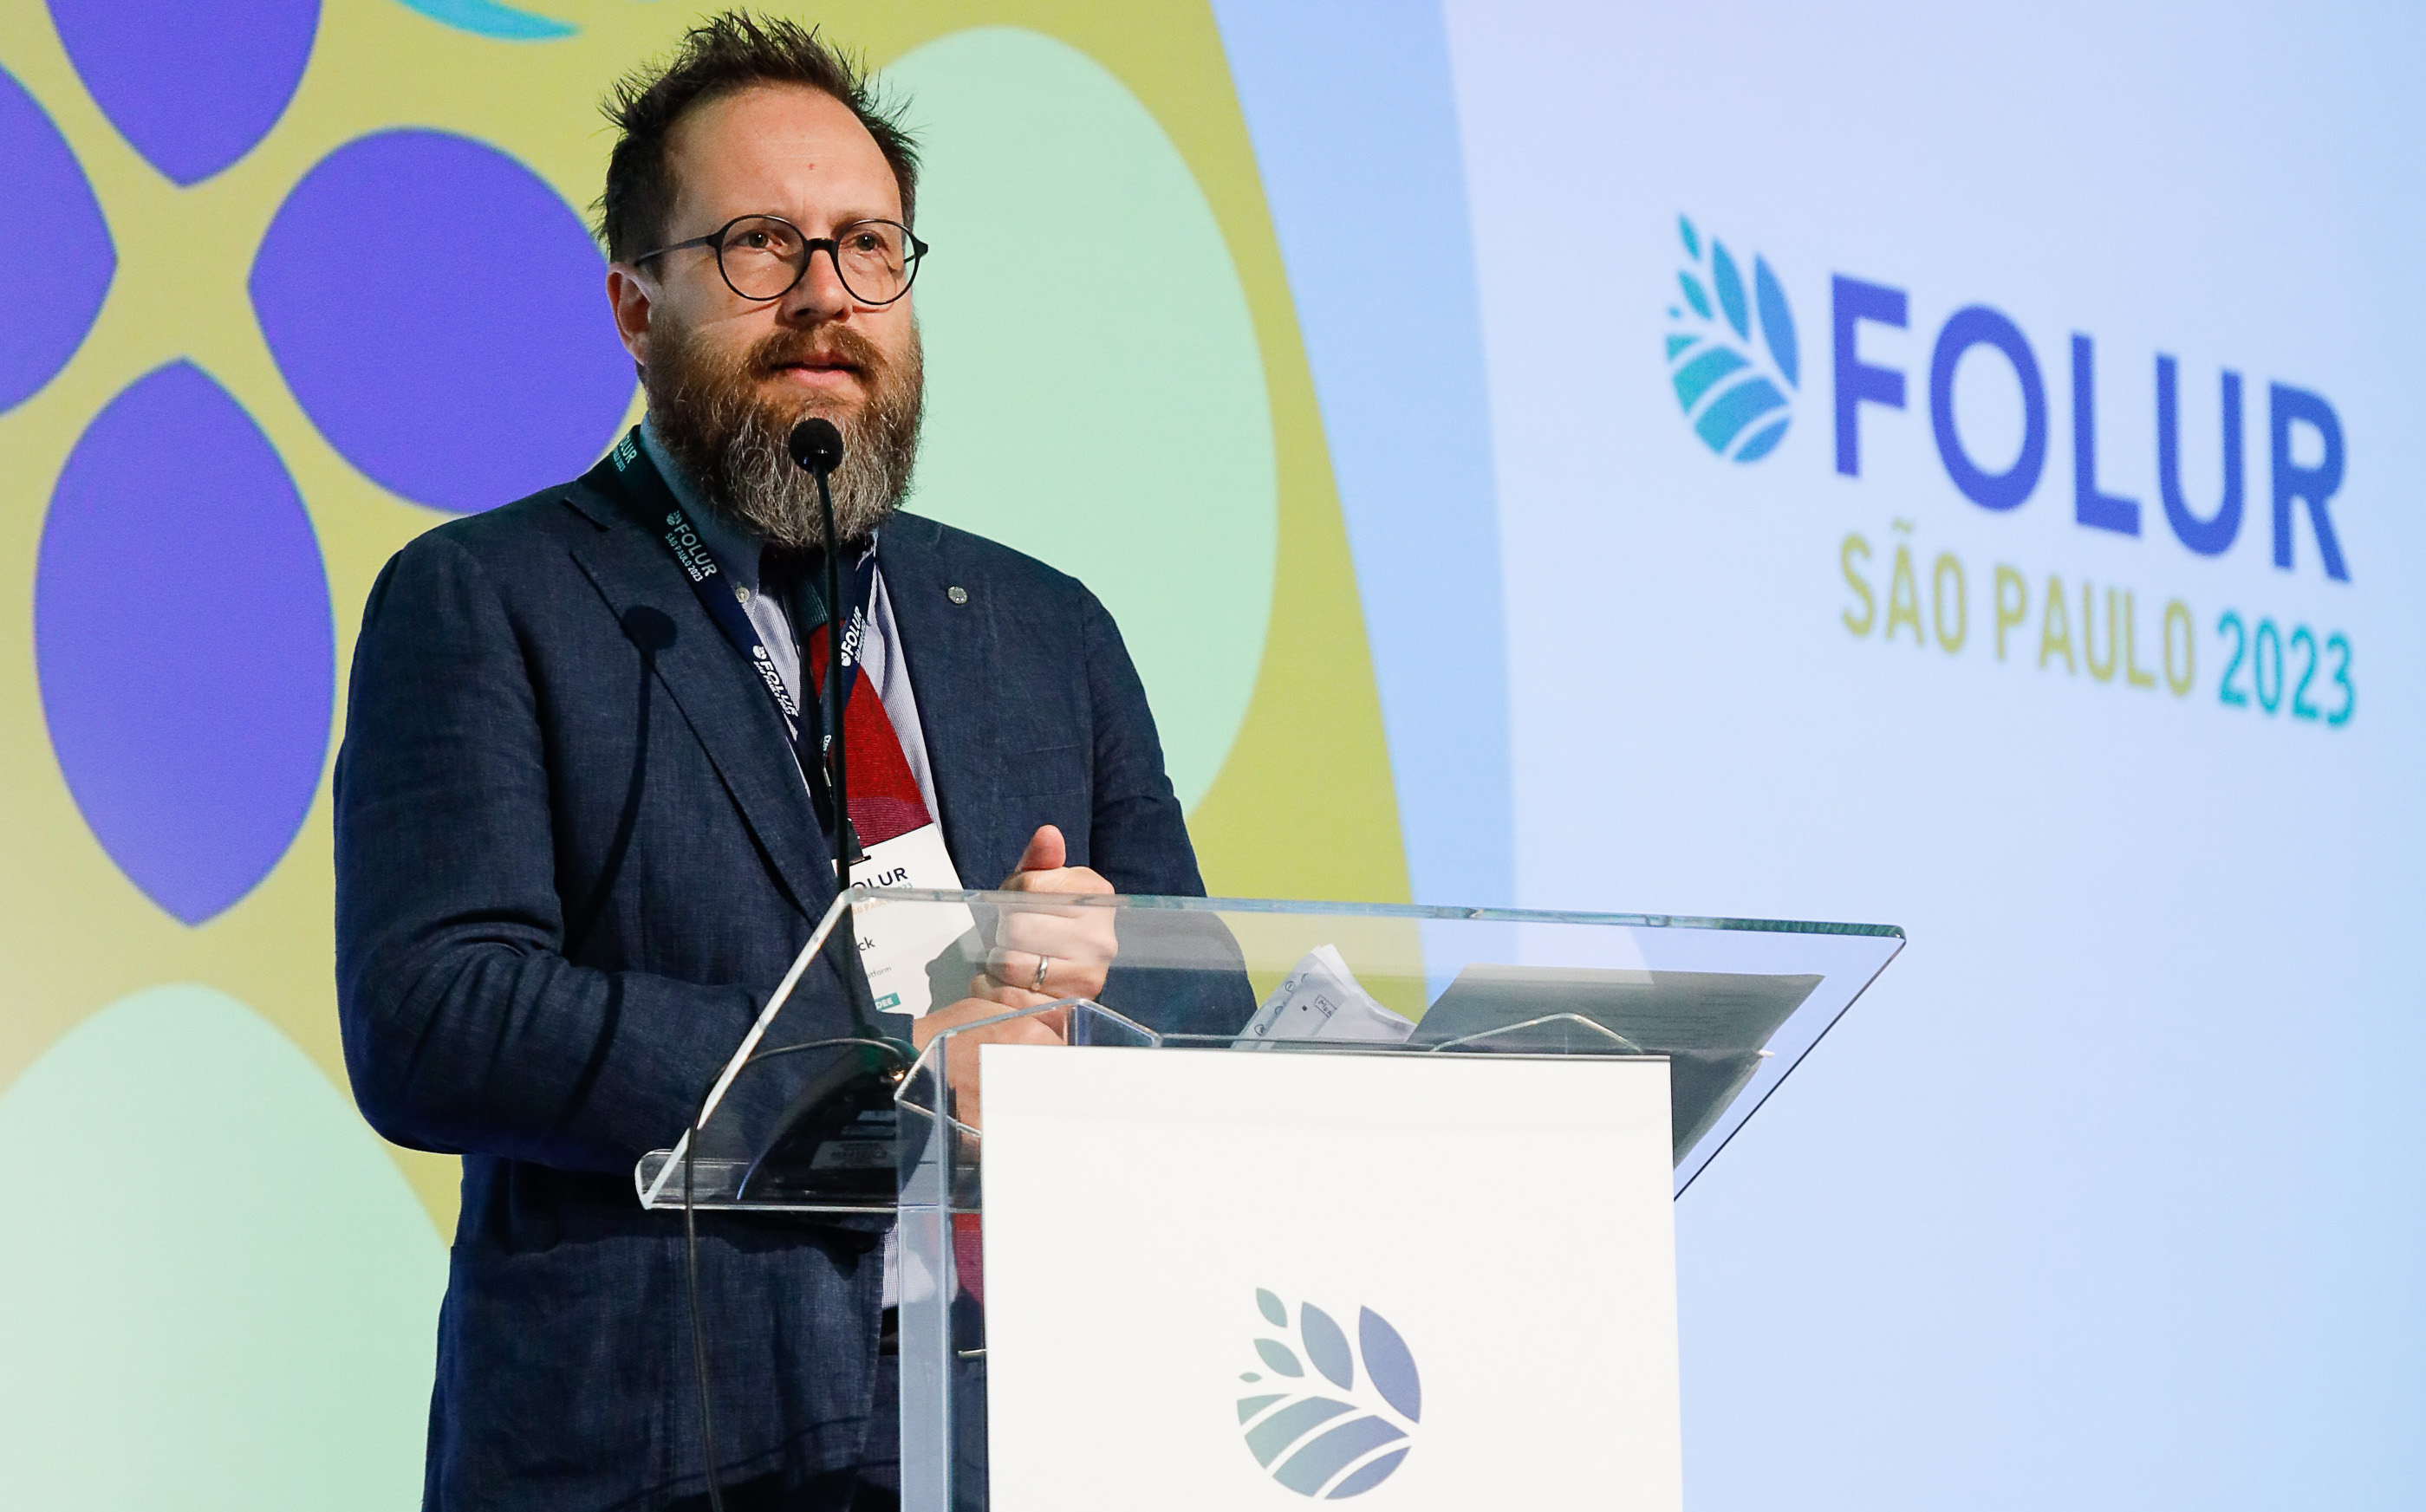 Patrick Kalas, political ecologist and environmental specialist with FAO, delivers a presentation at the FOLUR annual meeting in Sao Paulo. FOLUR/Mauro Nery